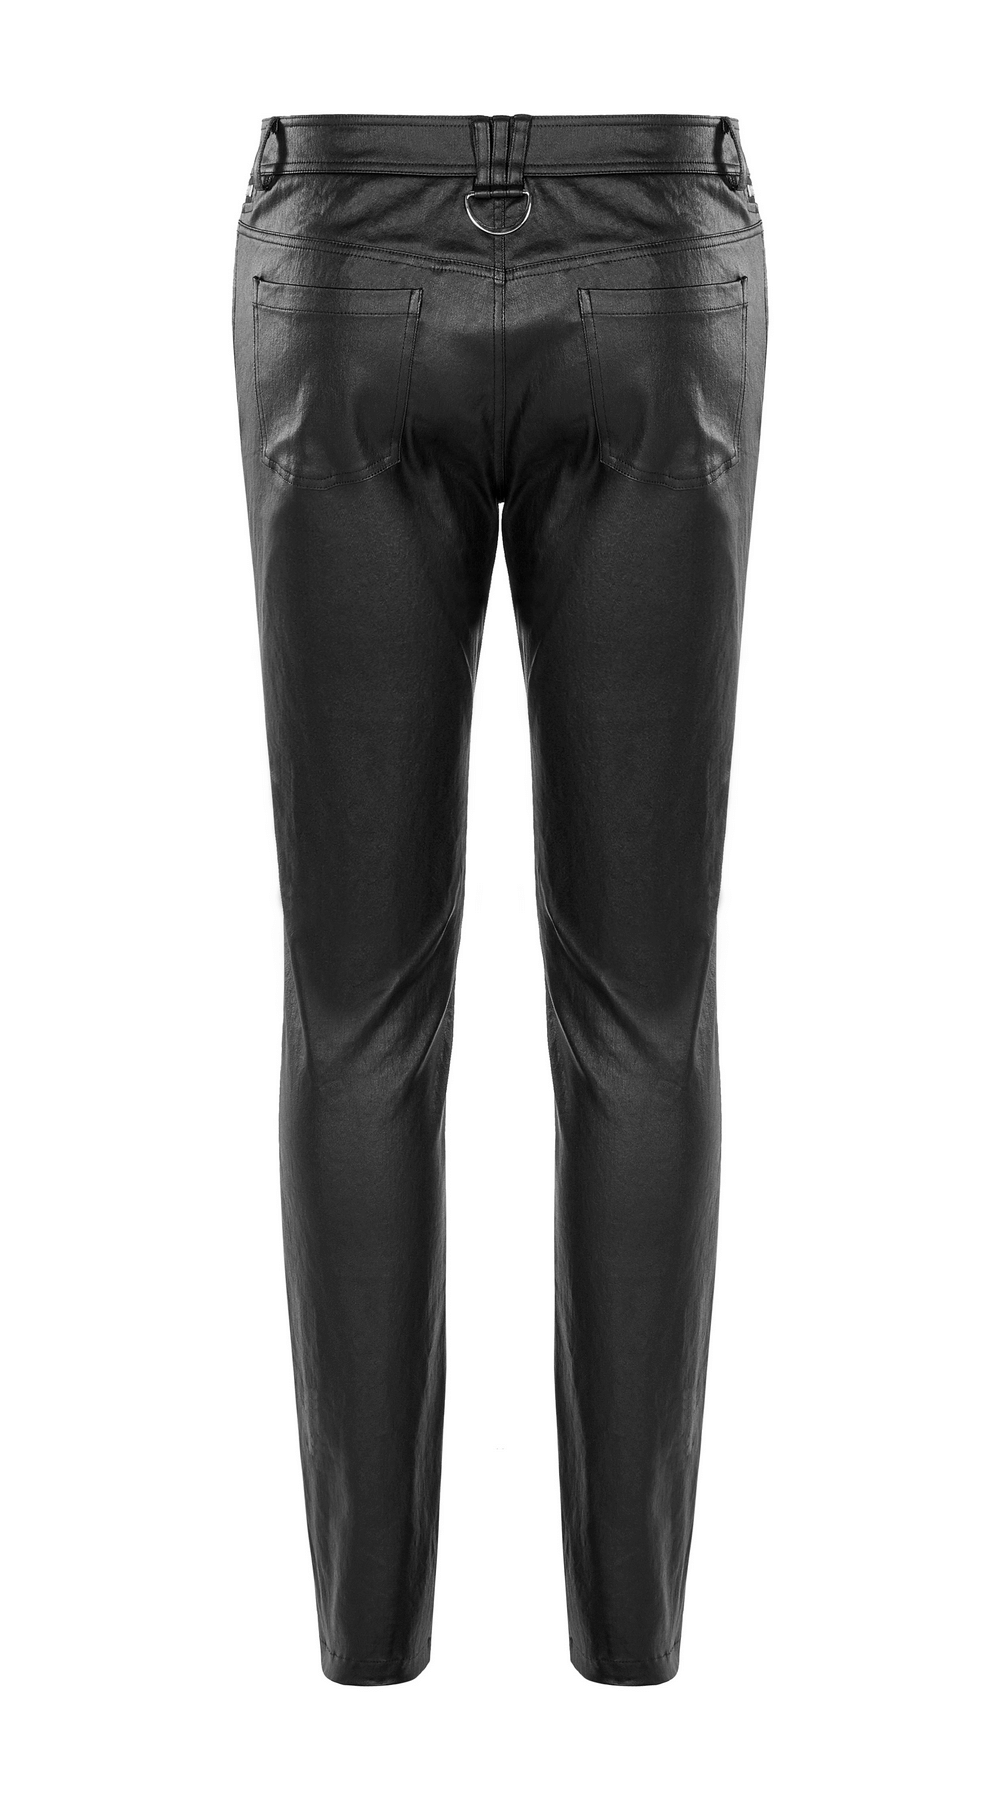 Edgy Punk PU Slim-Fit Fashion Trousers for Men